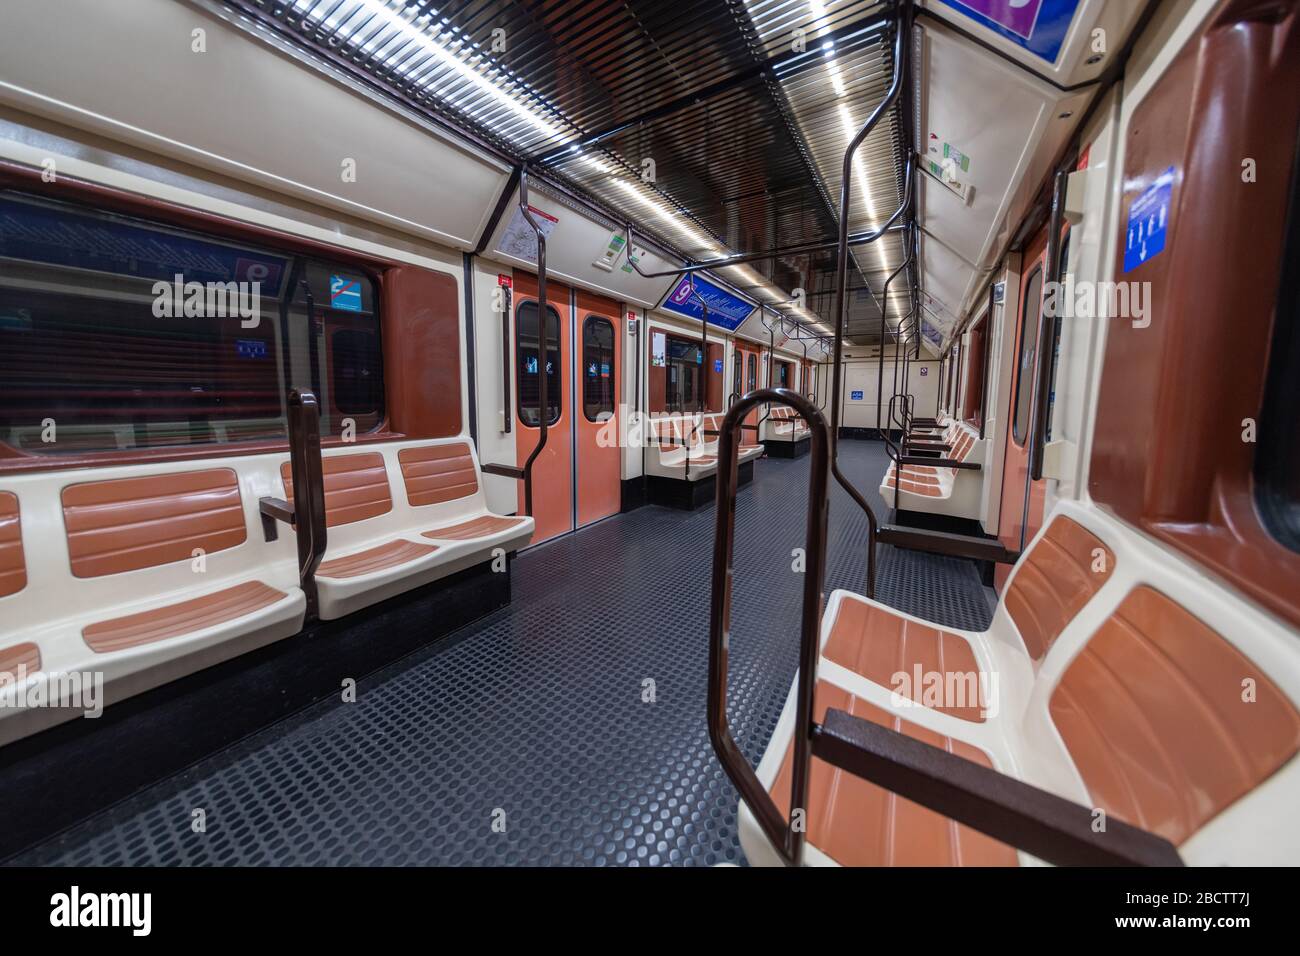 MADRID, SPAIN - APRIL 13, 2019: Inside empty Metro wagons on Line 9, an unusual sight for this type of transport. The Metro of Madrid is usually much Stock Photo